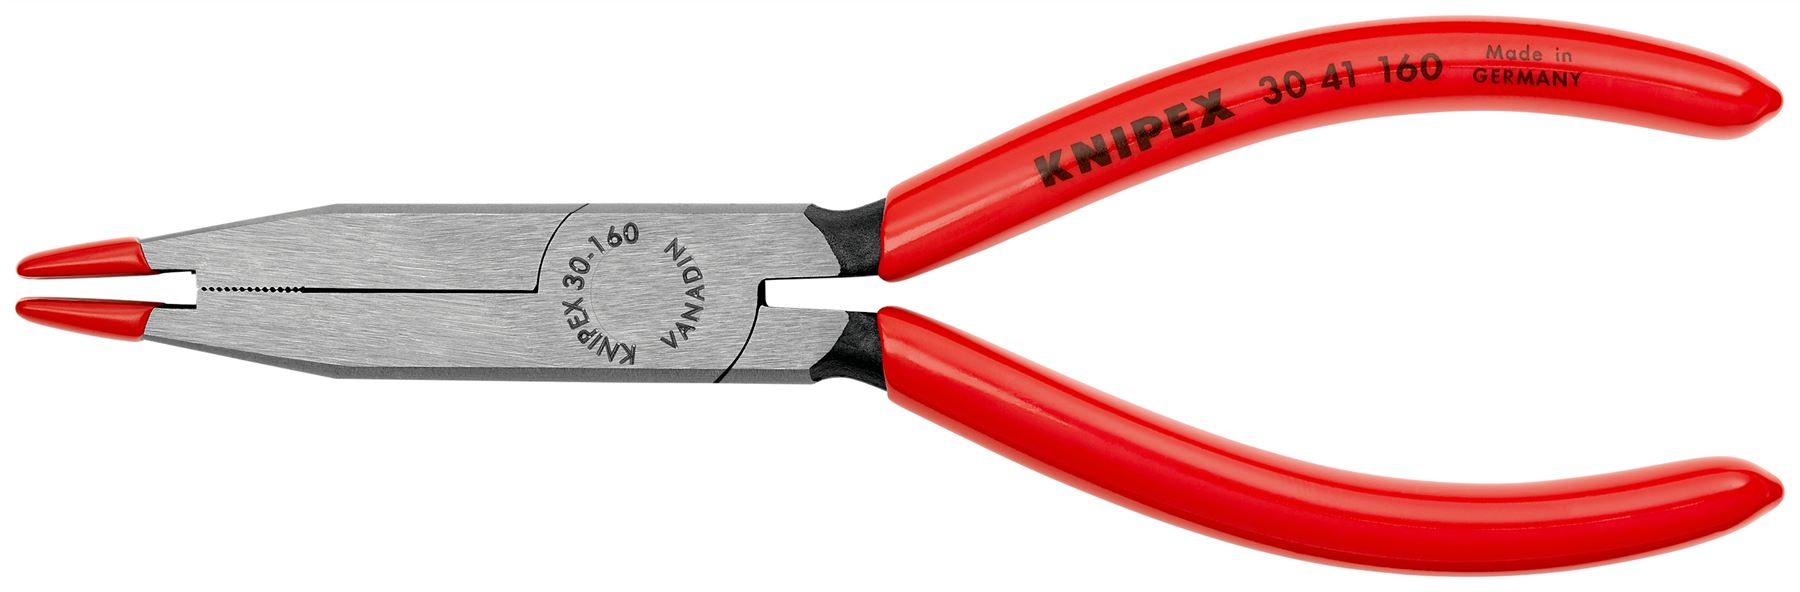 Knipex Halogen Bulb Exchange Pliers for Removal Installation 160mm 30 41 160